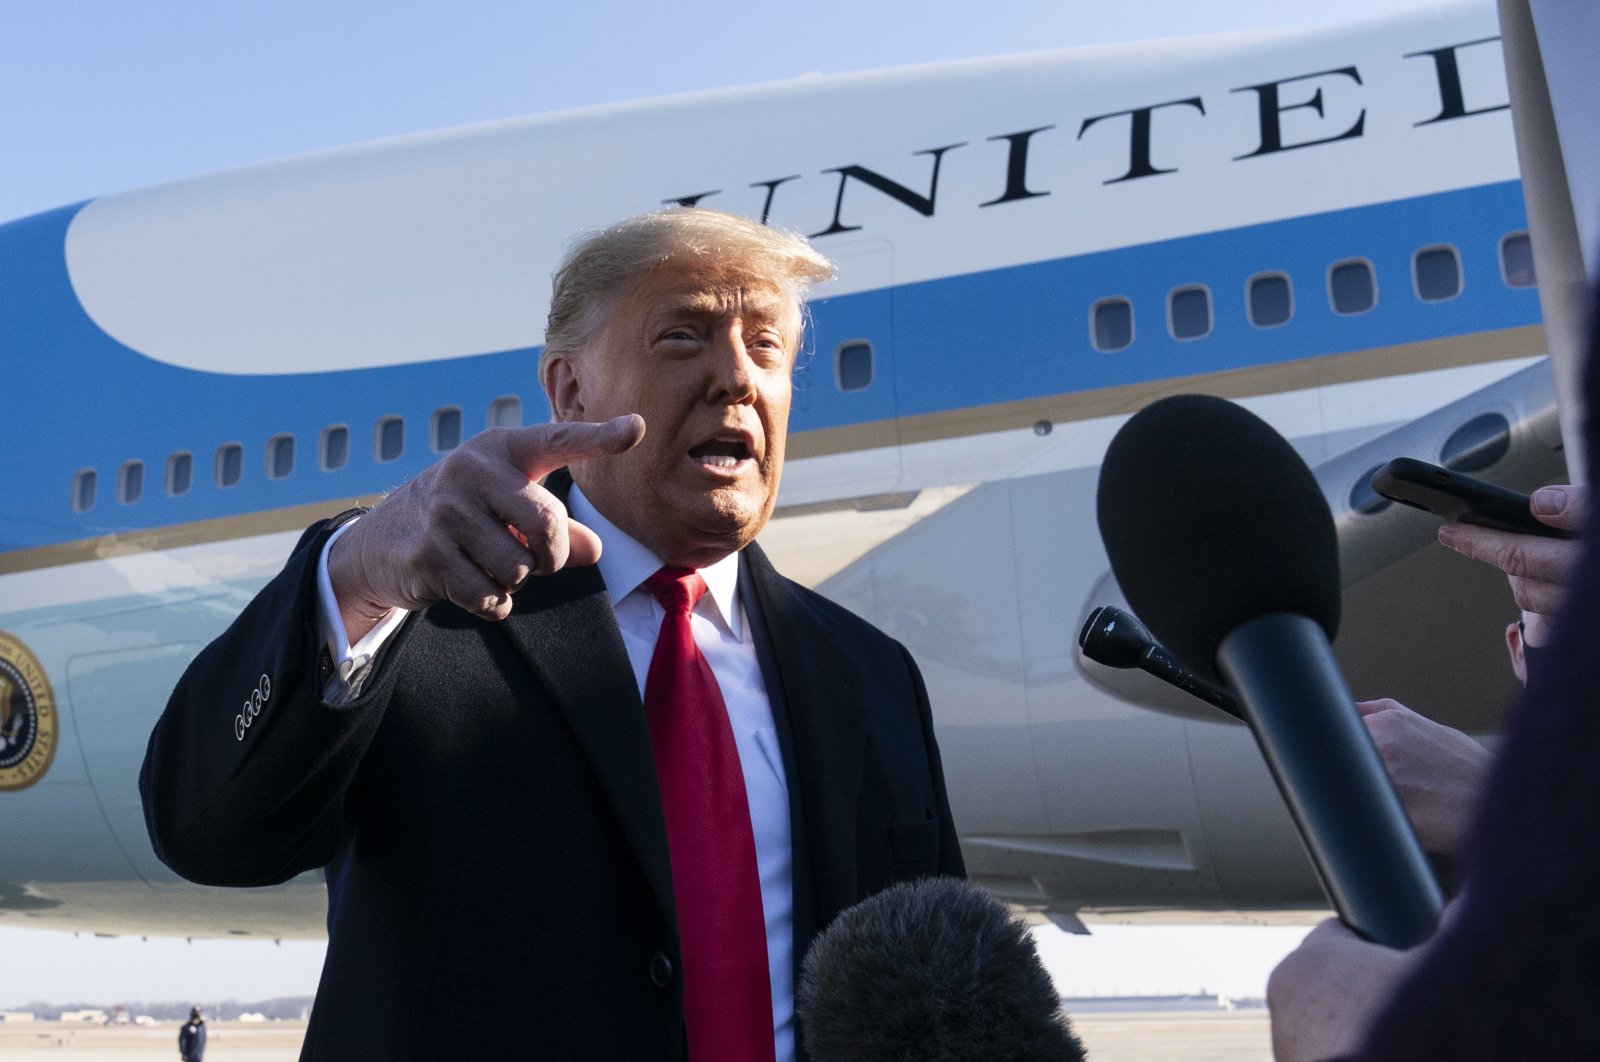 U.S. President Donald Trump speaks with reporters before boarding Air Force One upon departure, at Andrews Air Force Base, Maryland on Jan. 12, 2021. (AP Photo)